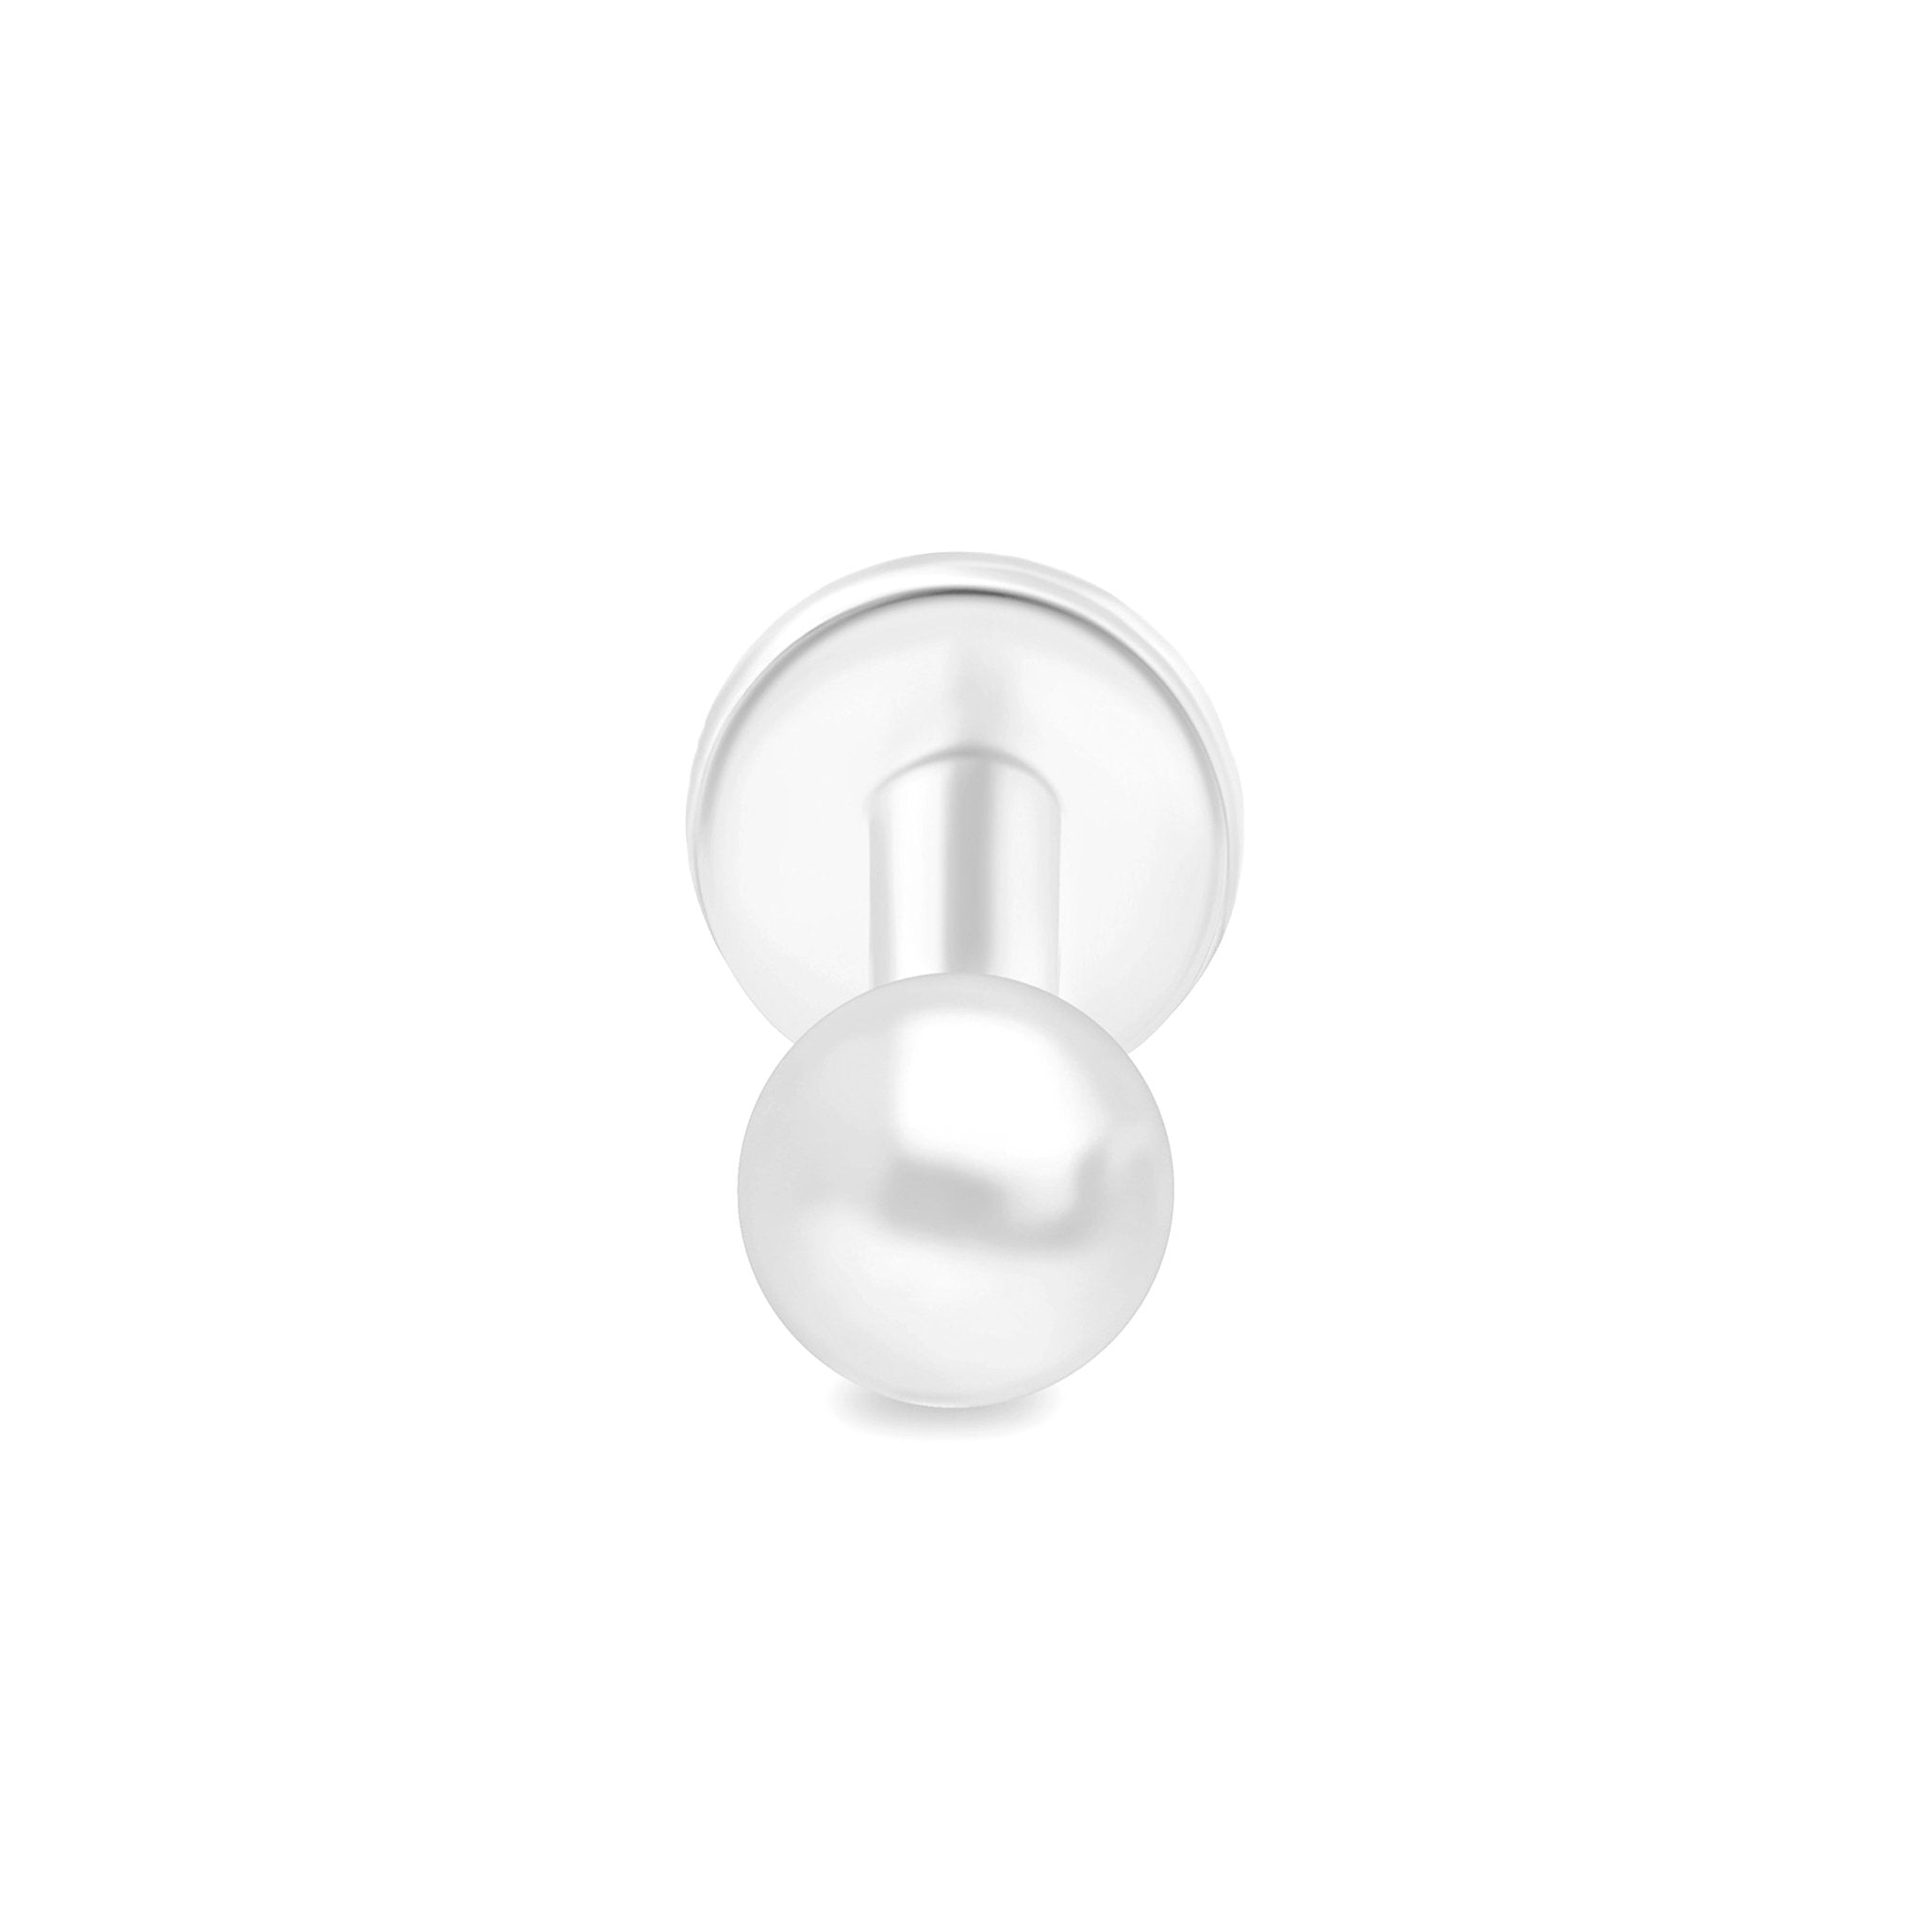 Ball Flat Back Stud Earrings Estella Collection #product_description# 18239 Cartilage Earring Cartilage Earrings Cartilage Piercing #tag4# #tag5# #tag6# #tag7# #tag8# #tag9# #tag10# 2.5MM 5MM